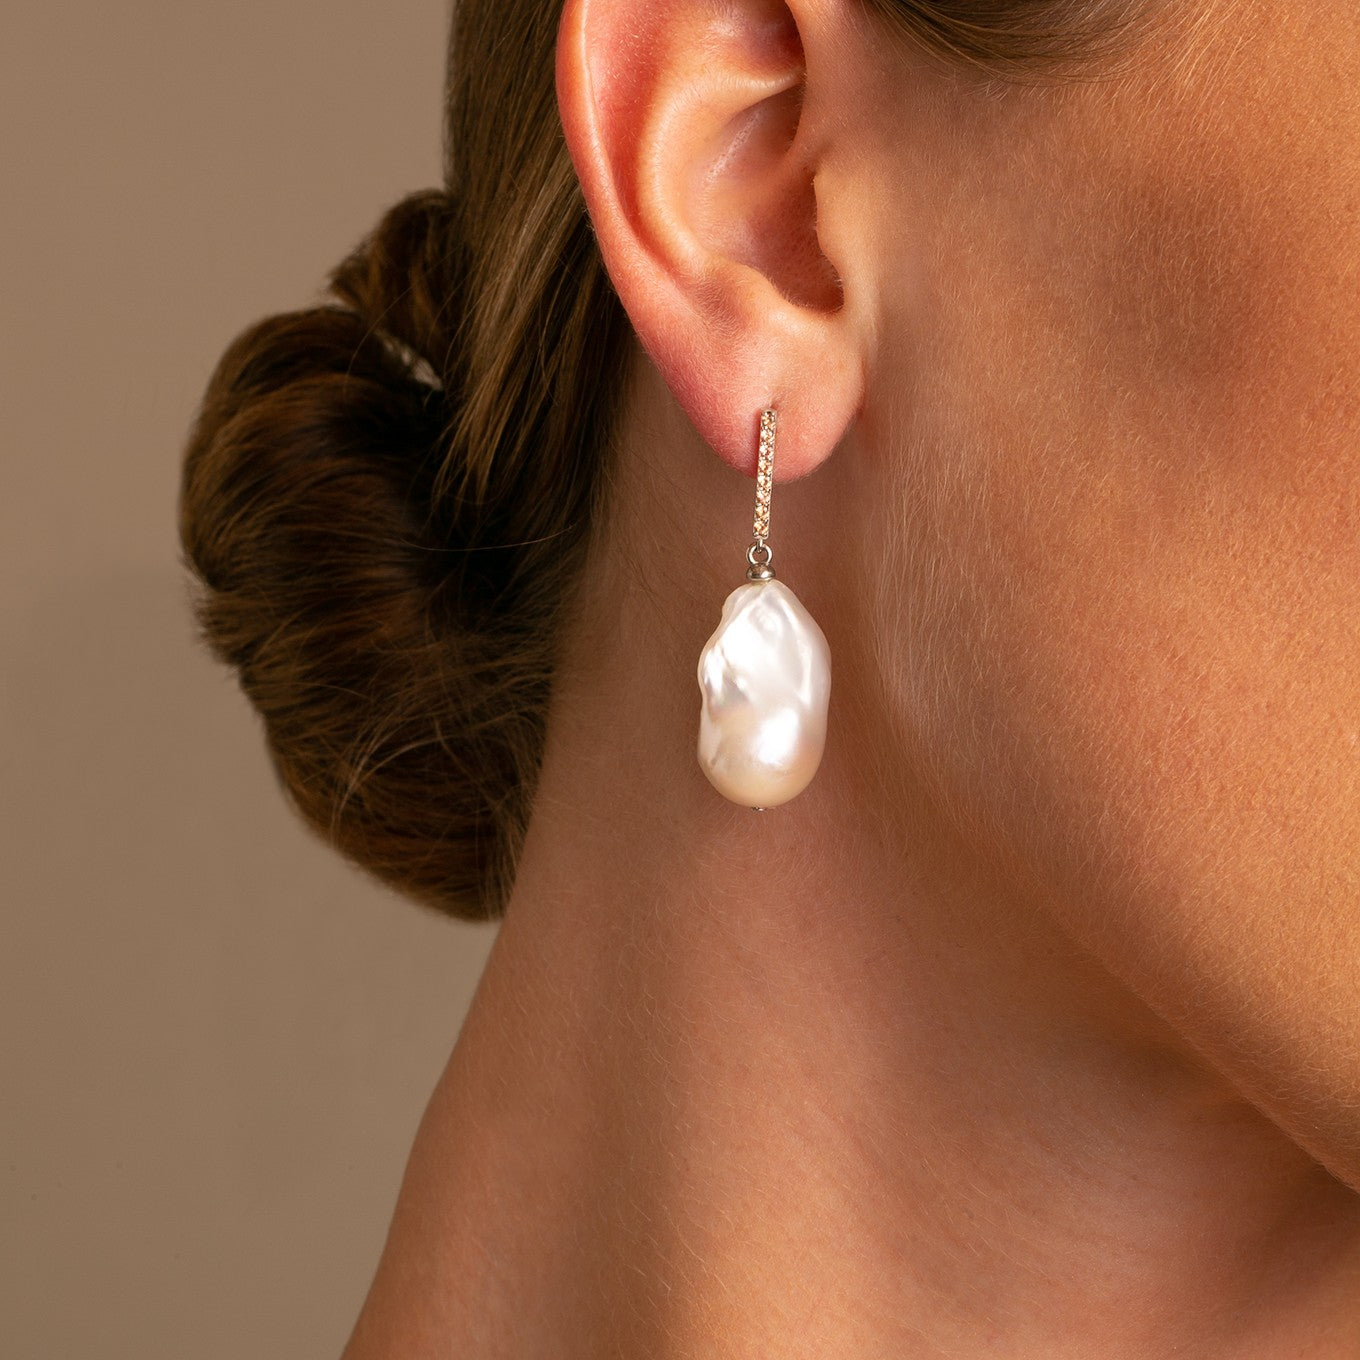 14K Yellow Gold Bar with Sapphires and Baroque Pearl Drop Earrings  on model- Thomas Laine Jewelry